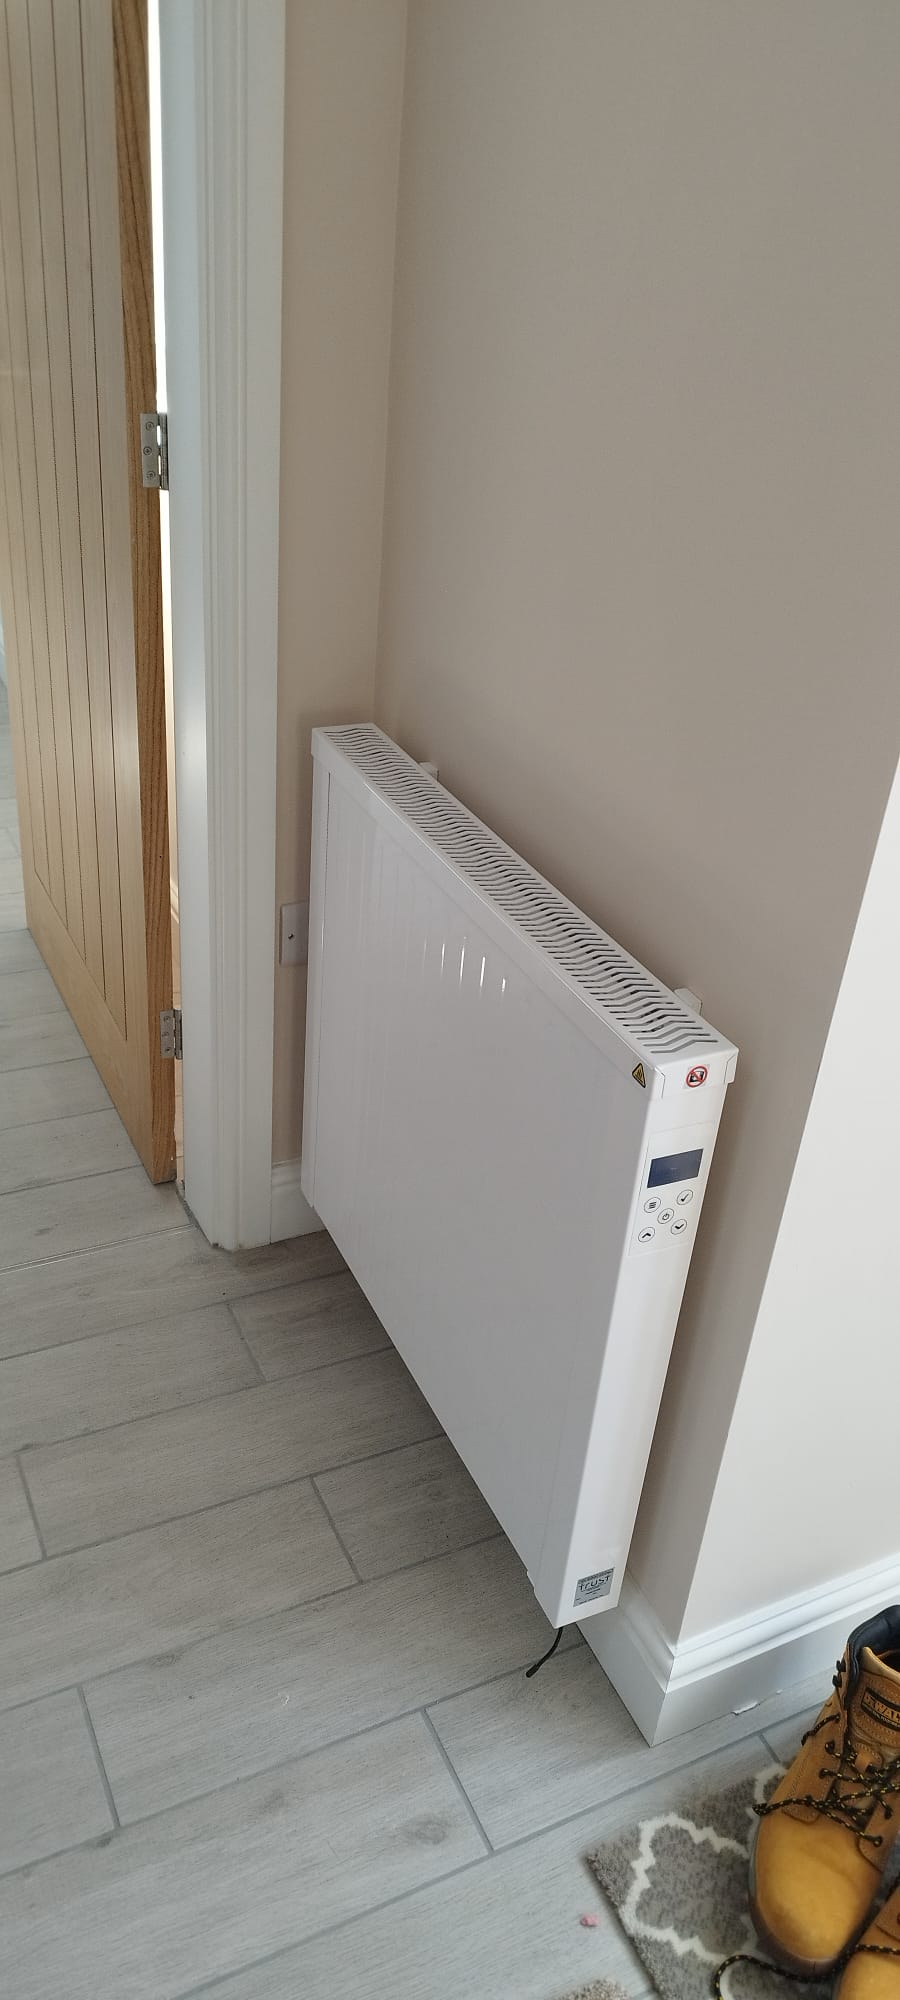 An infrared heating panel installed in a home, providing heat